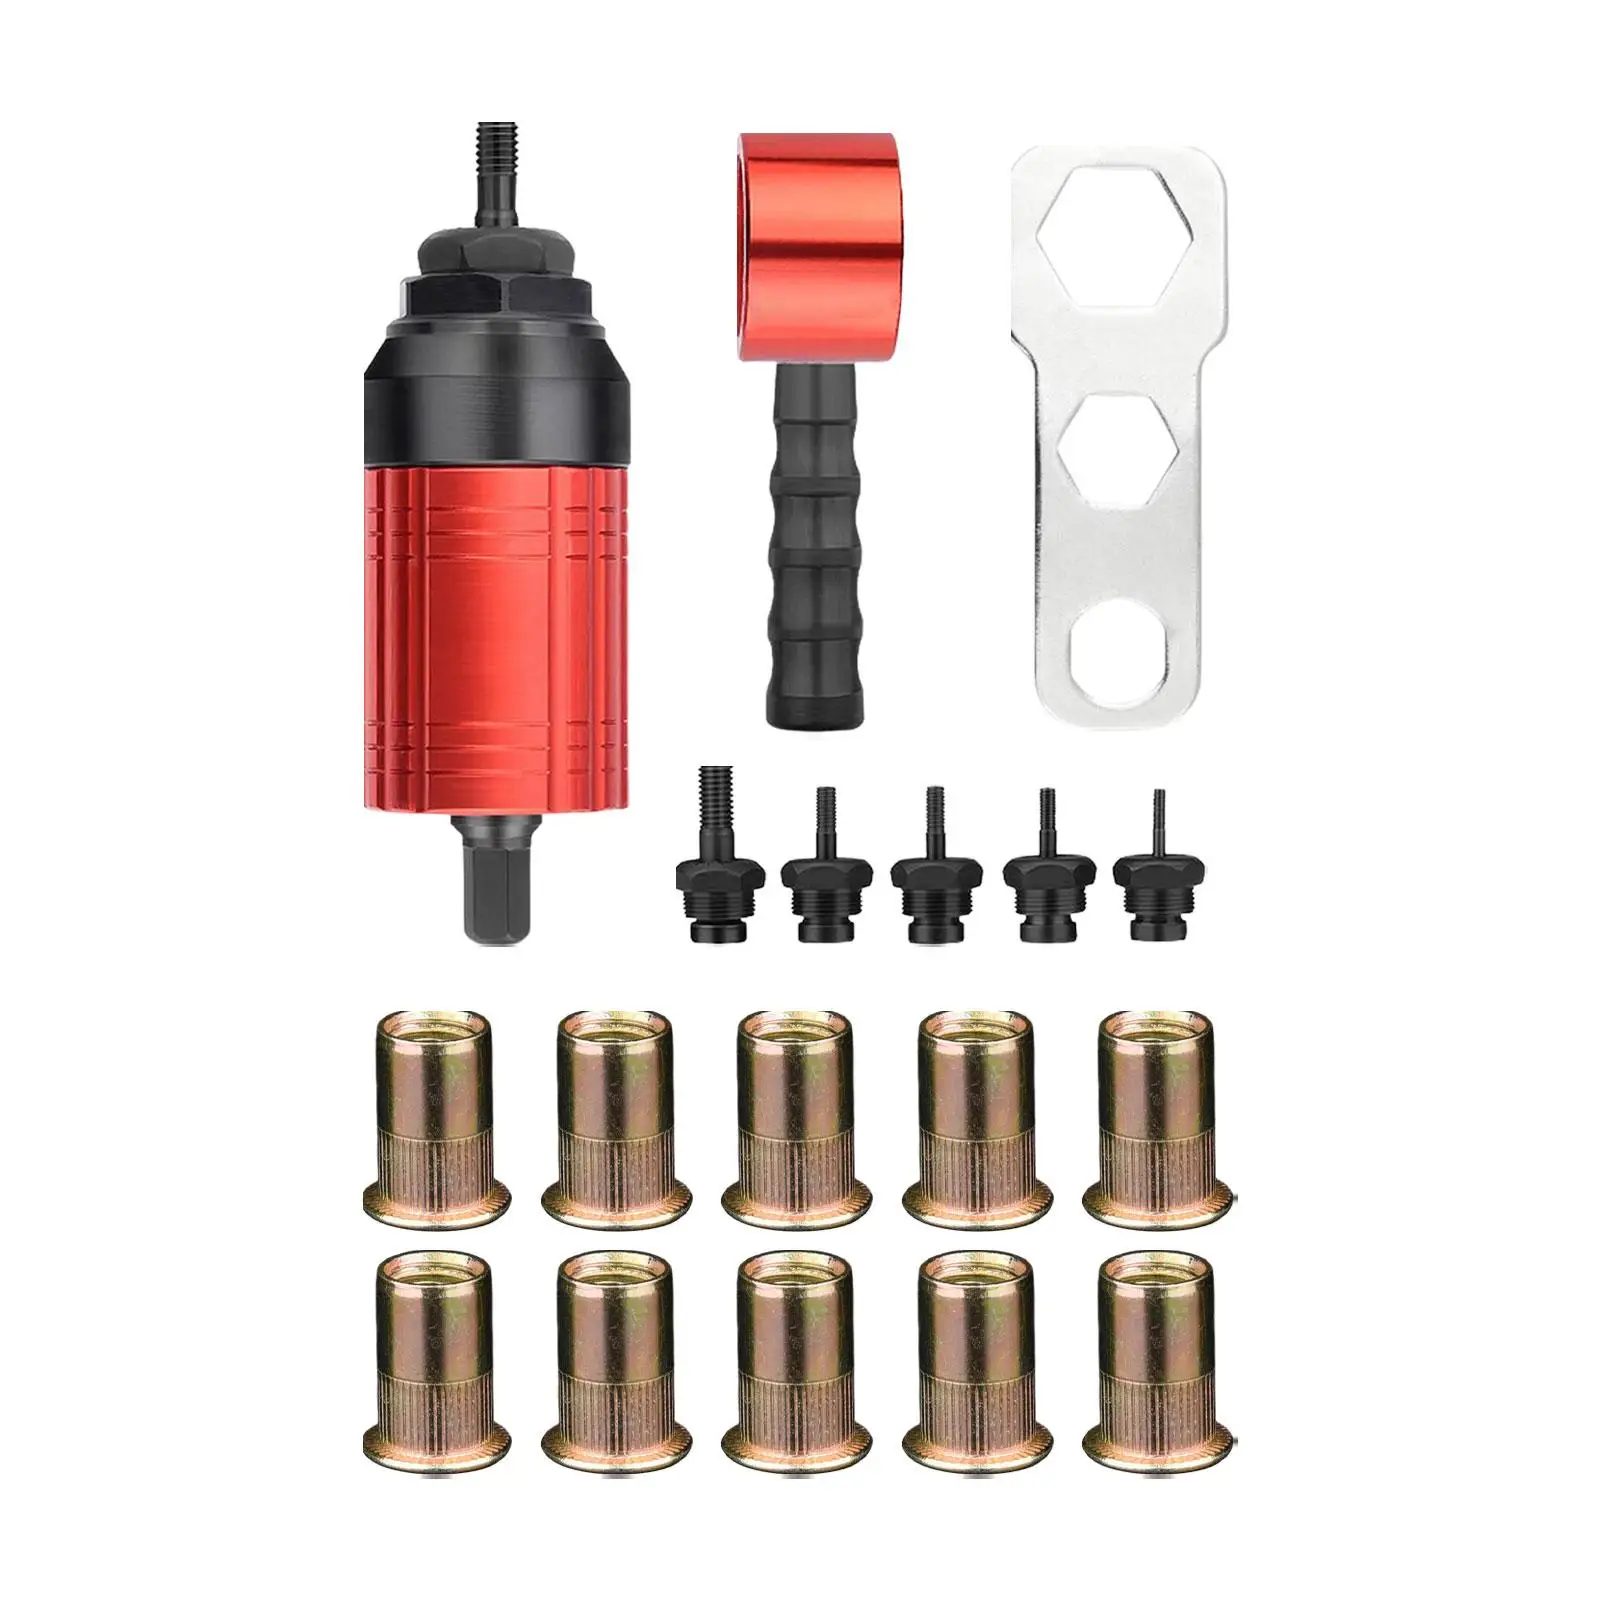 Rivet Nut Drill Adaptor Riveting Kits with 10 Rivet Nuts Nut Tool for Ship Electrical Appliance Architecture Furniture Car